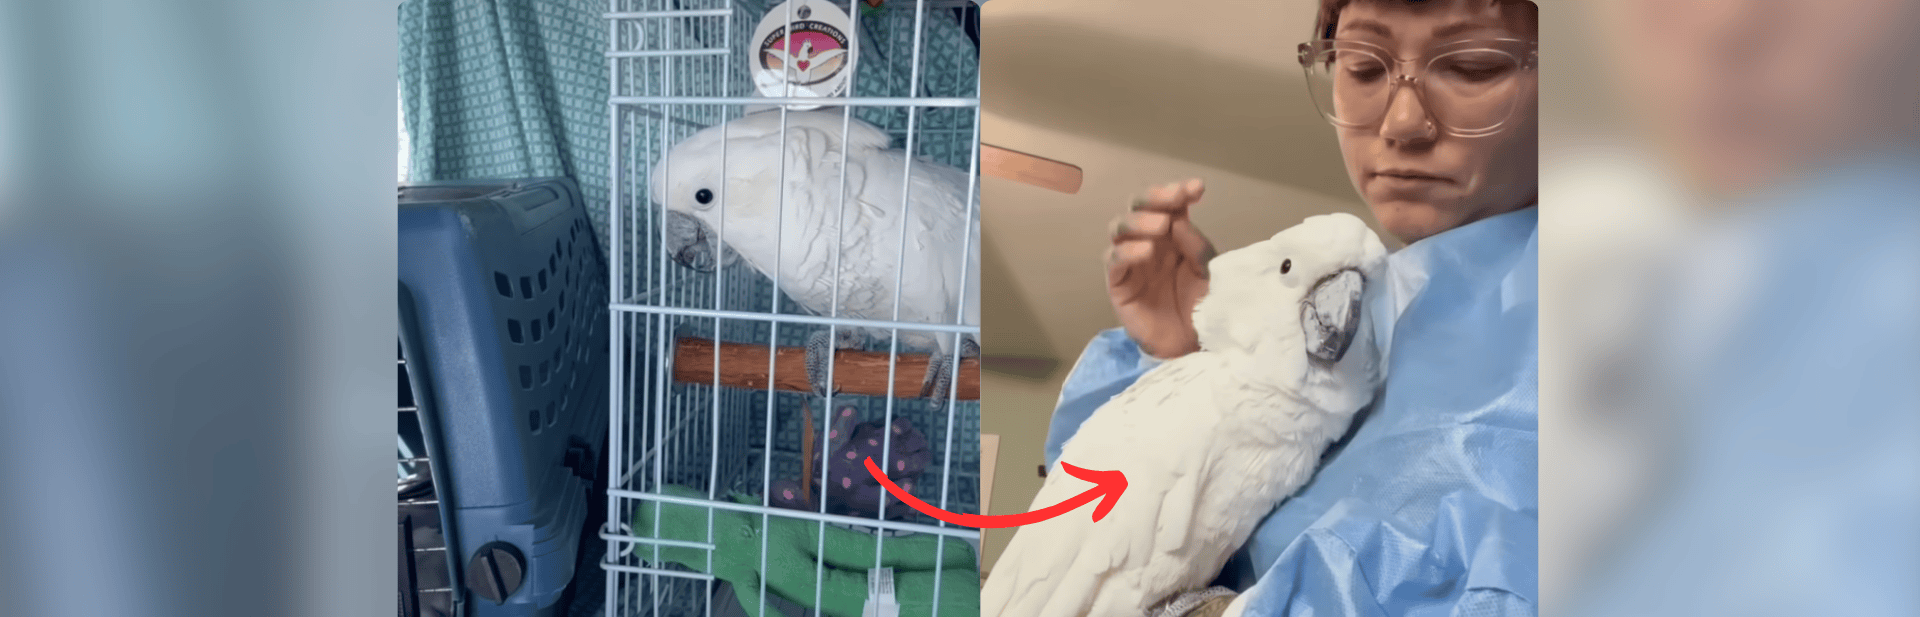 Elderly Cockatoo Finds Happiness and His Voice Again